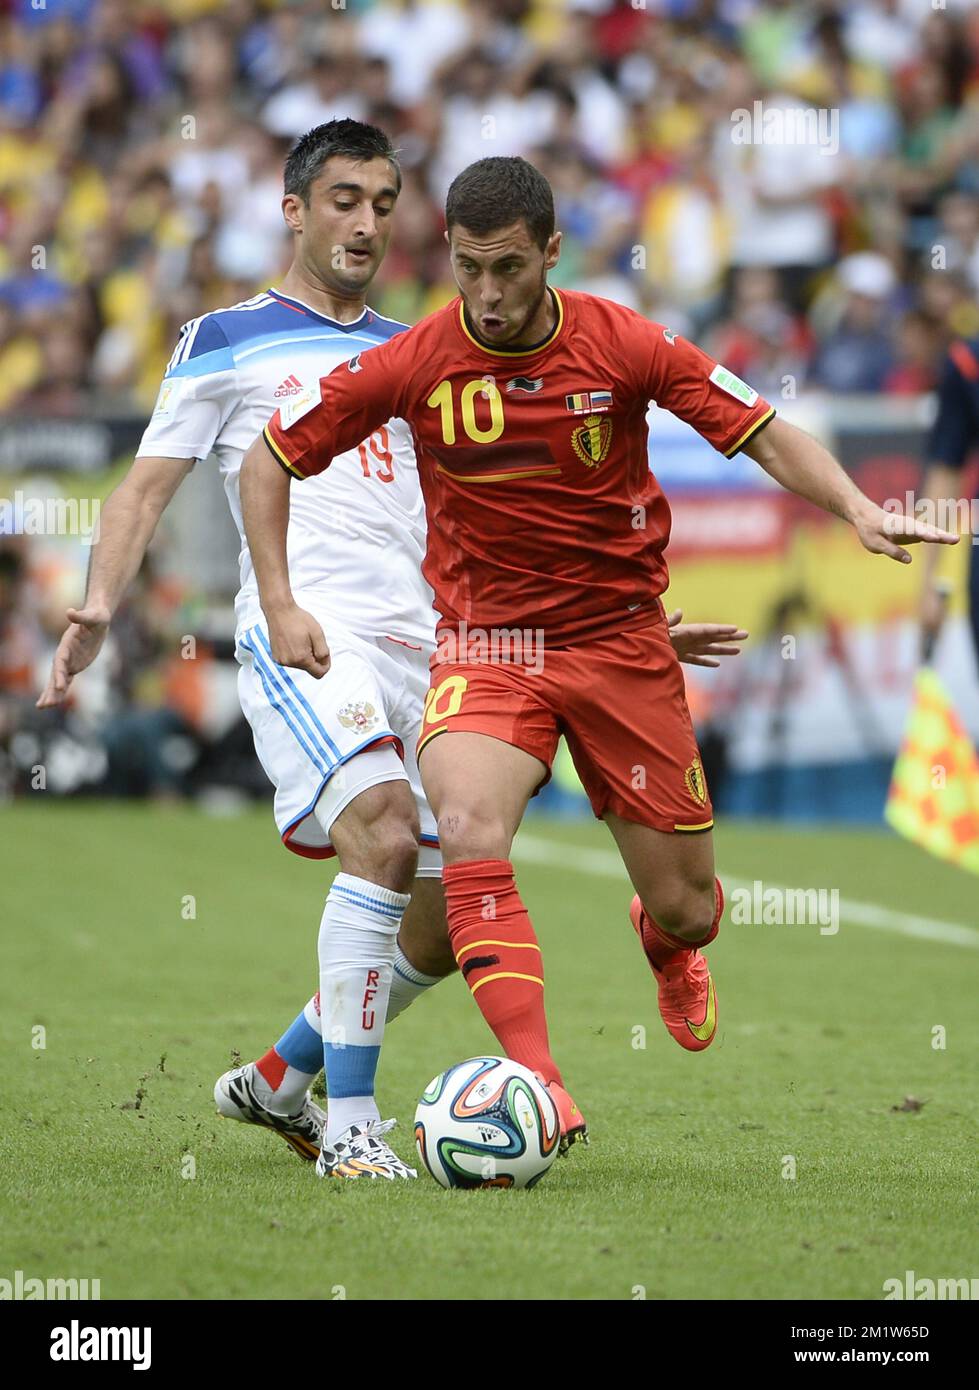 20140622 - RIO DE JANEIRO, BRAZIL: Russia's Aleksandr Samedov and Belgium's Eden Hazard fight for the ball during a soccer game between Belgian national team The Red Devils and Russia in Rio de Janeiro, Brazil, the second game in Group H of the first round of the 2014 FIFA World Cup, Sunday 22 June 2014.   BELGA PHOTO DIRK WAEM Stock Photo